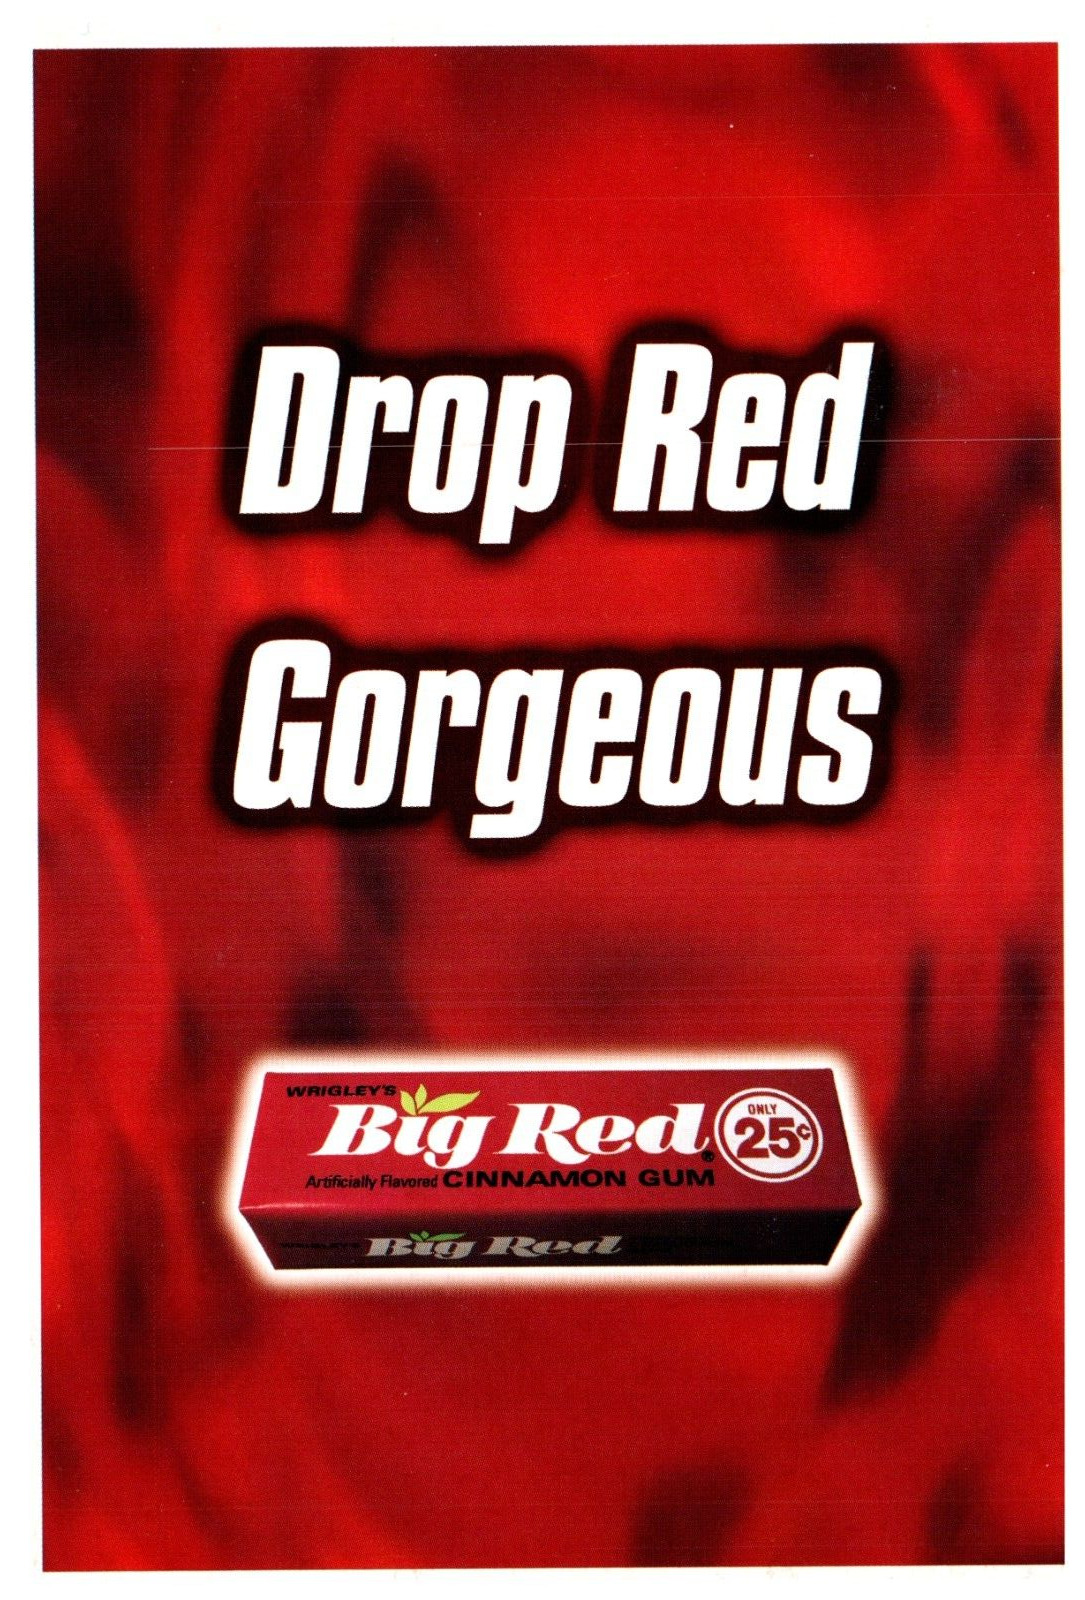 Red Gum Postcard Drop Red Gorgeous 2000 advertising